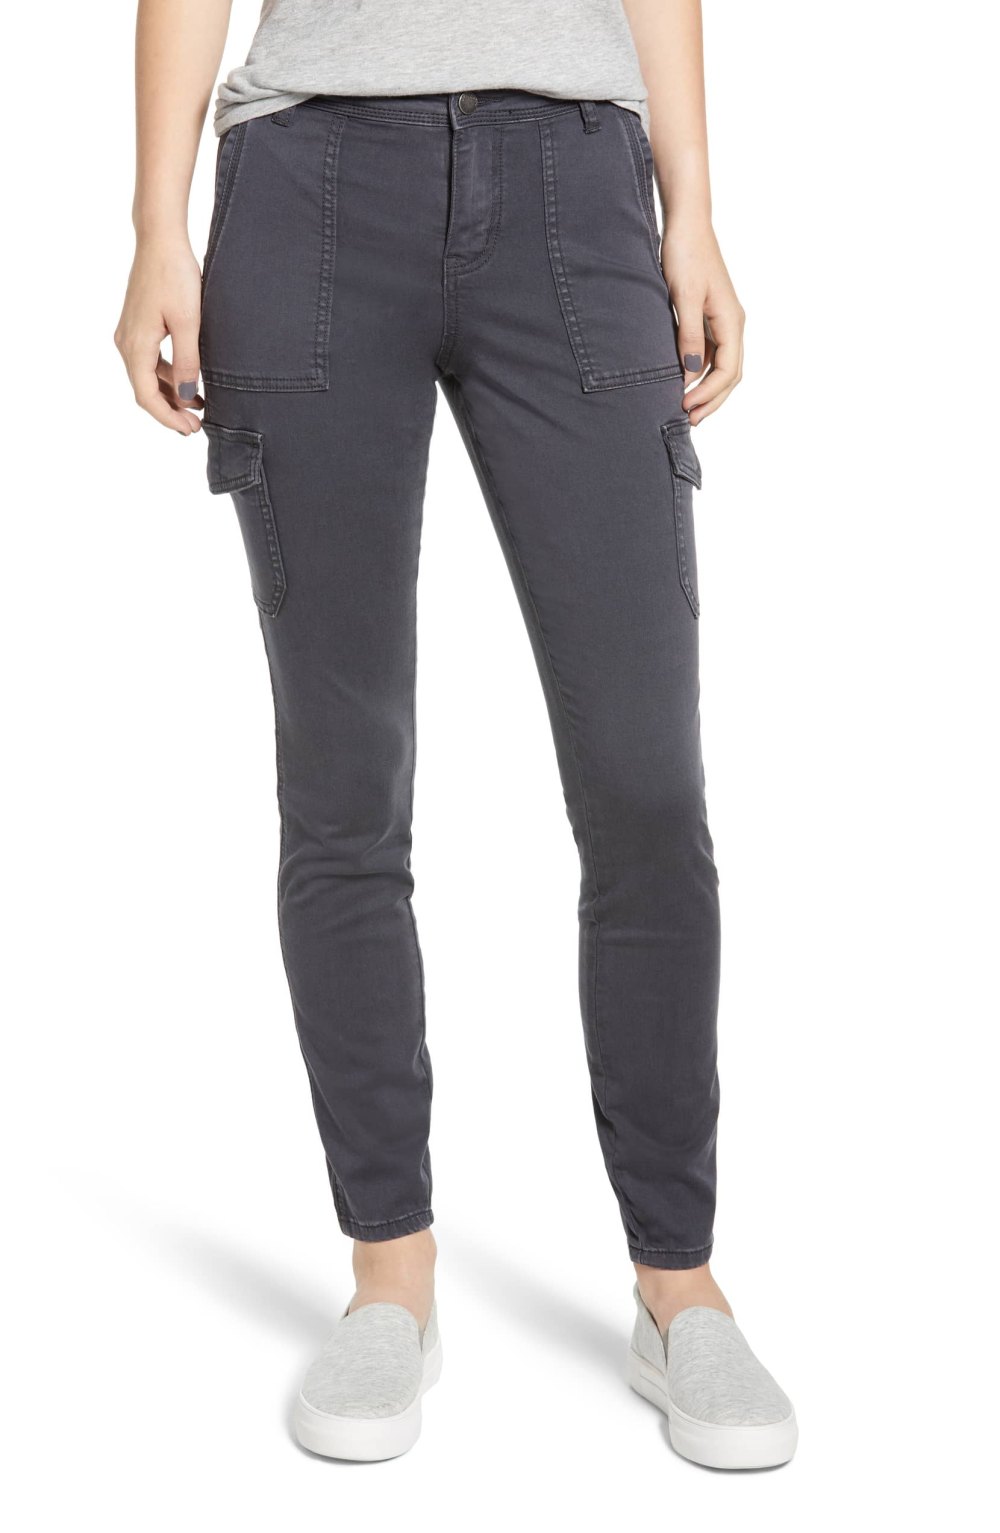 These Utility Pants Are Perfect for Throw and Go Looks